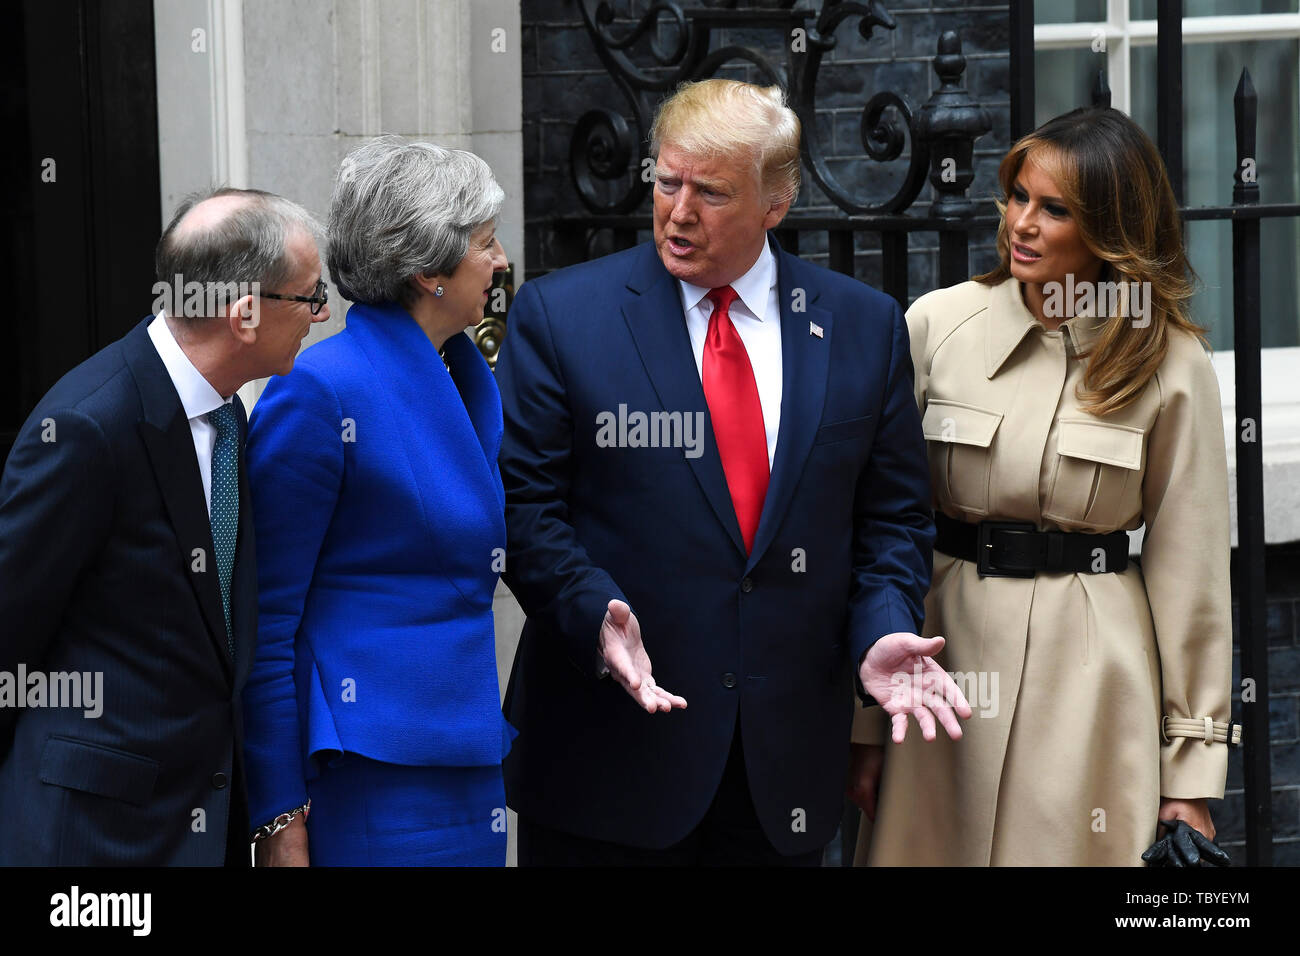 London, UK. 4th June, 2019. U.S. President Donald Trump (2nd R) and his wife Melania Trump (1st R) pose for photos with British Prime Minister Theresa May (2nd L) and her husband Philip May at 10 Downing Street in London, Britain on June 4, 2019. British Prime Minister Theresa May said Tuesday that she and U.S. President Donald Trump wanted an ambitious trade agreement after Brexit. Credit: Alberto Pezzali/Xinhua/Alamy Live News Stock Photo